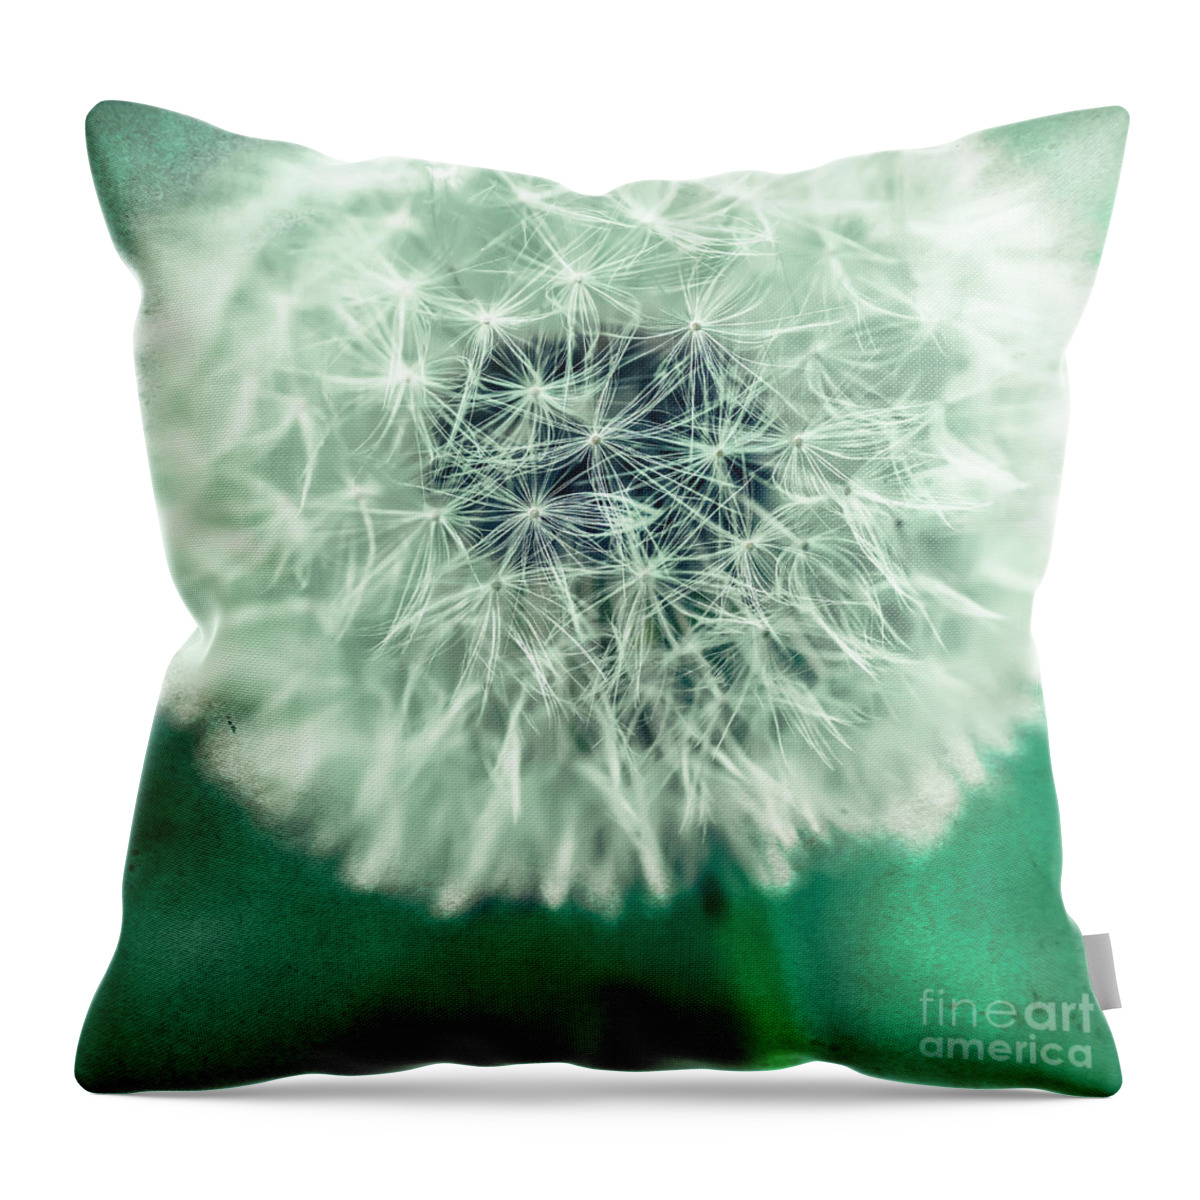 1x1 Throw Pillow featuring the photograph Blowball 1x1 by Hannes Cmarits